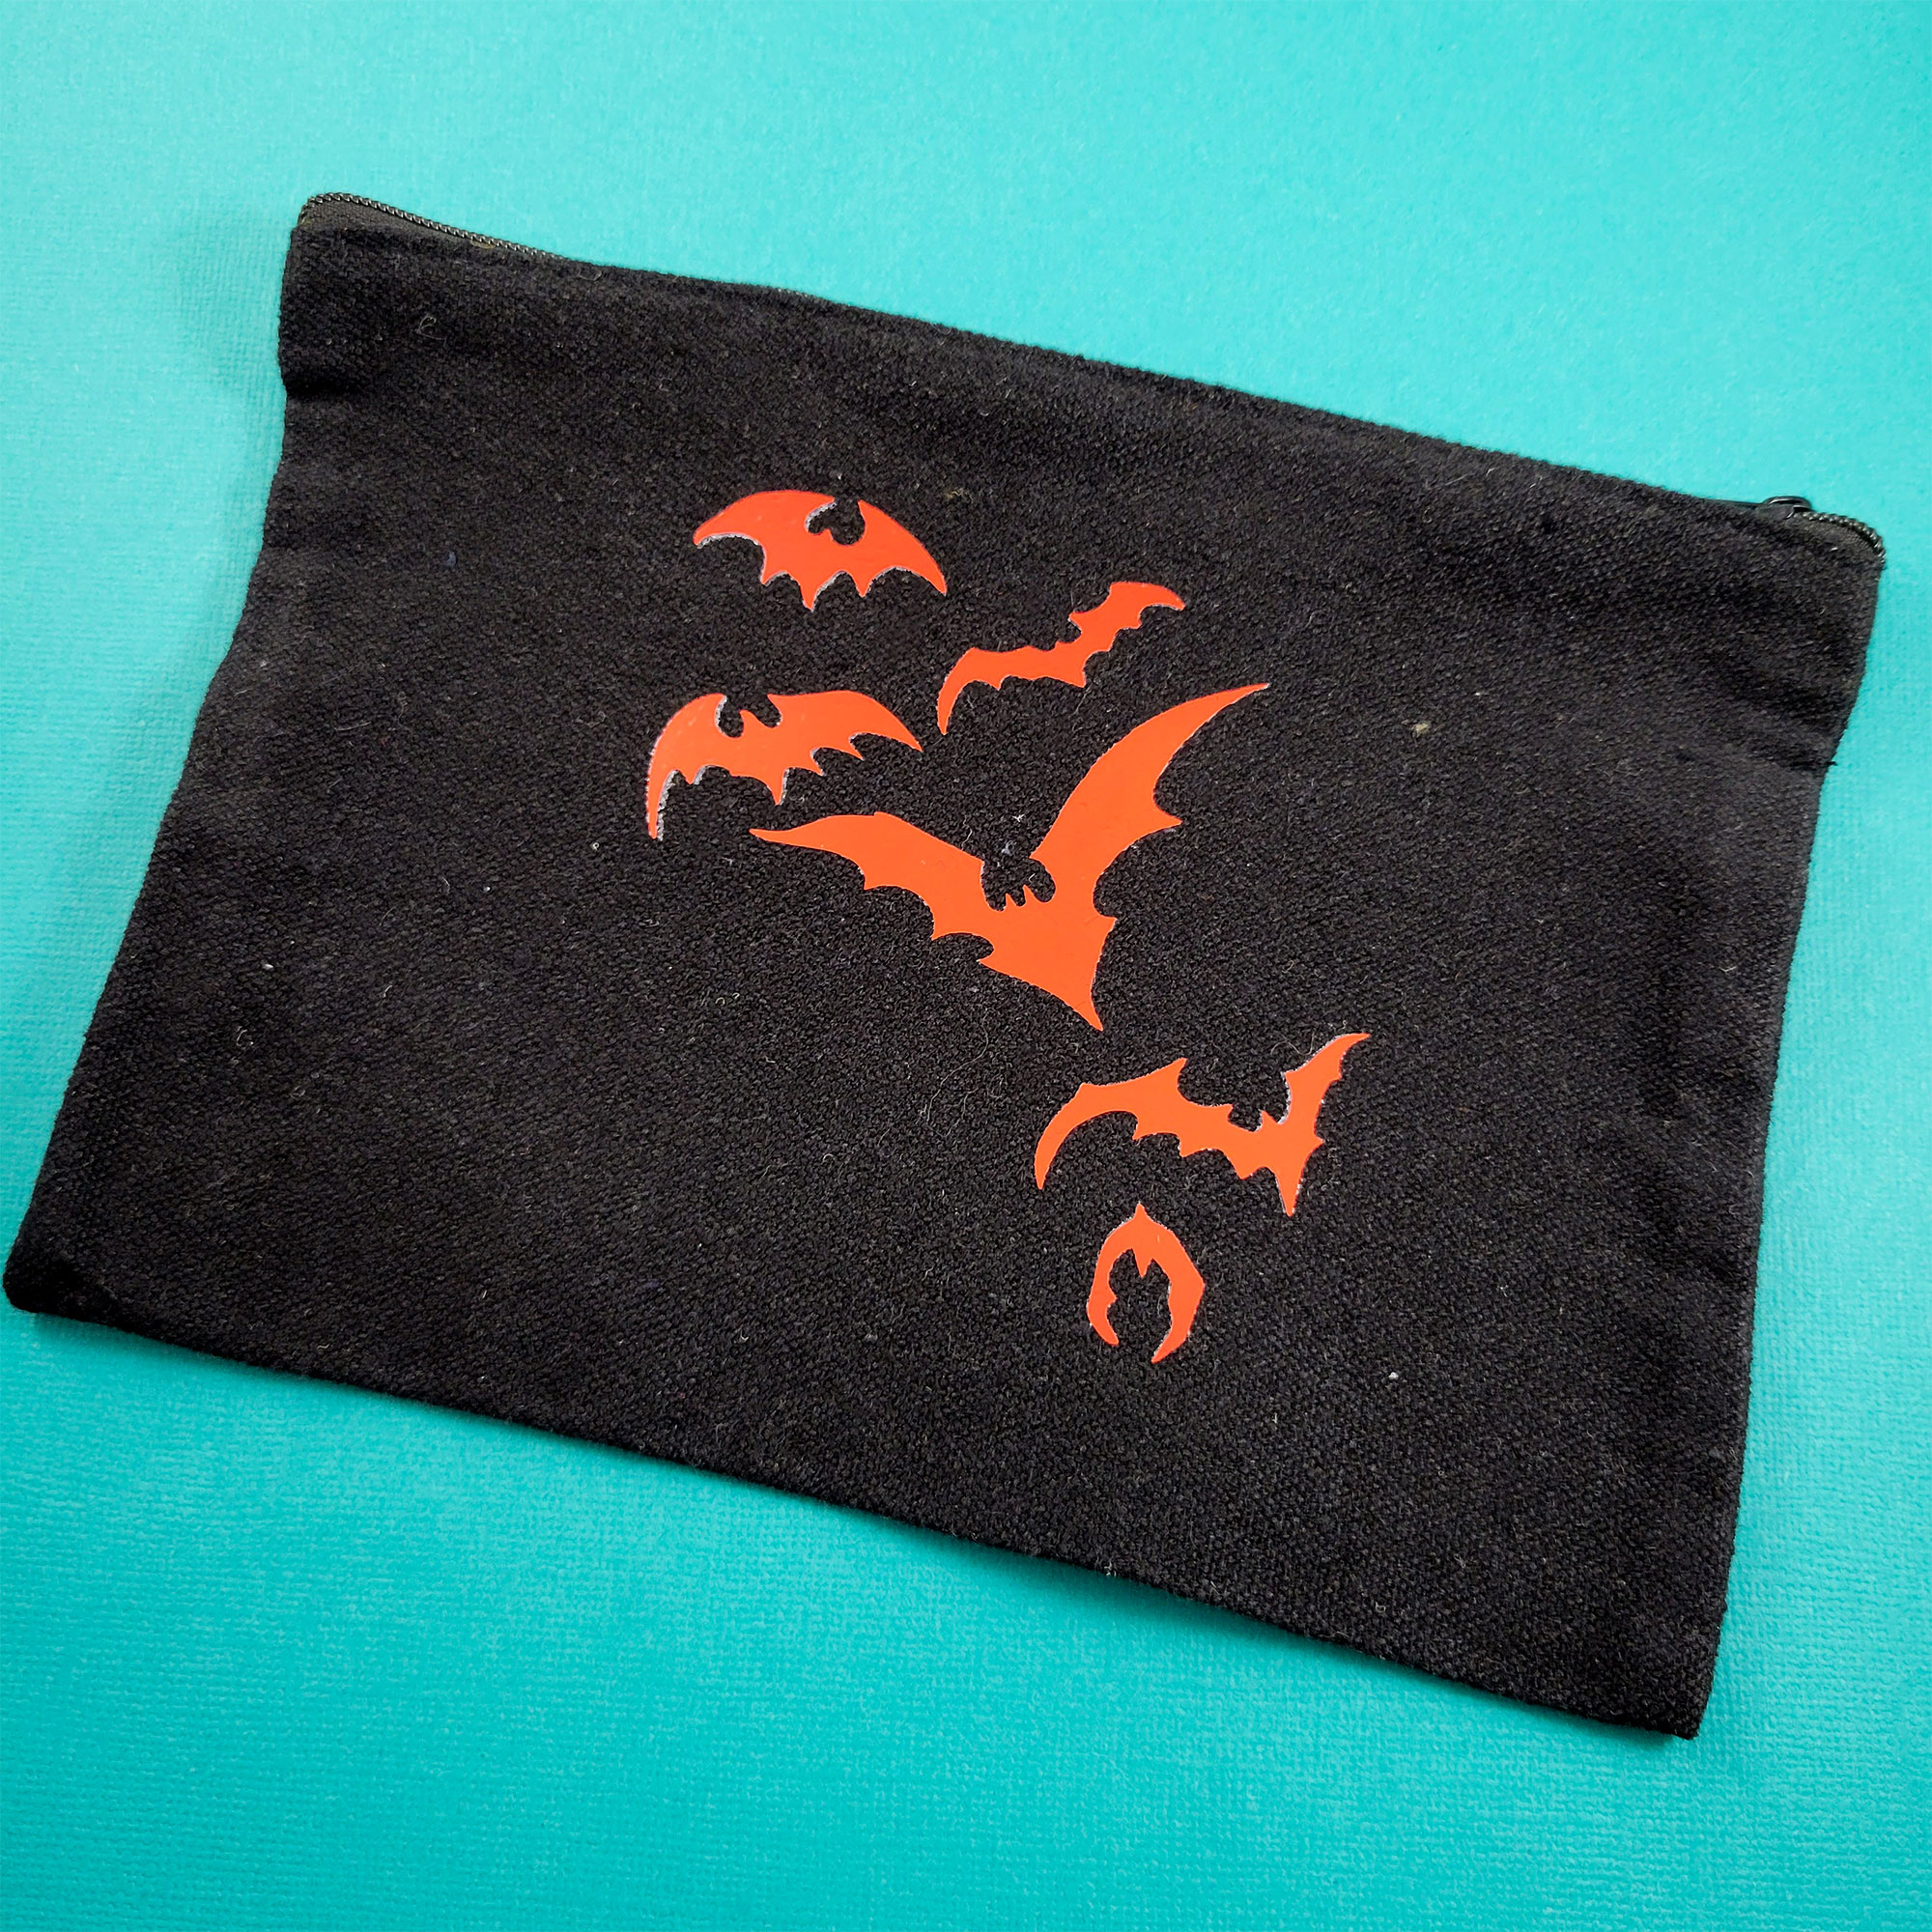 D&D Club Accessory Bag with Bats by Wilde Designs